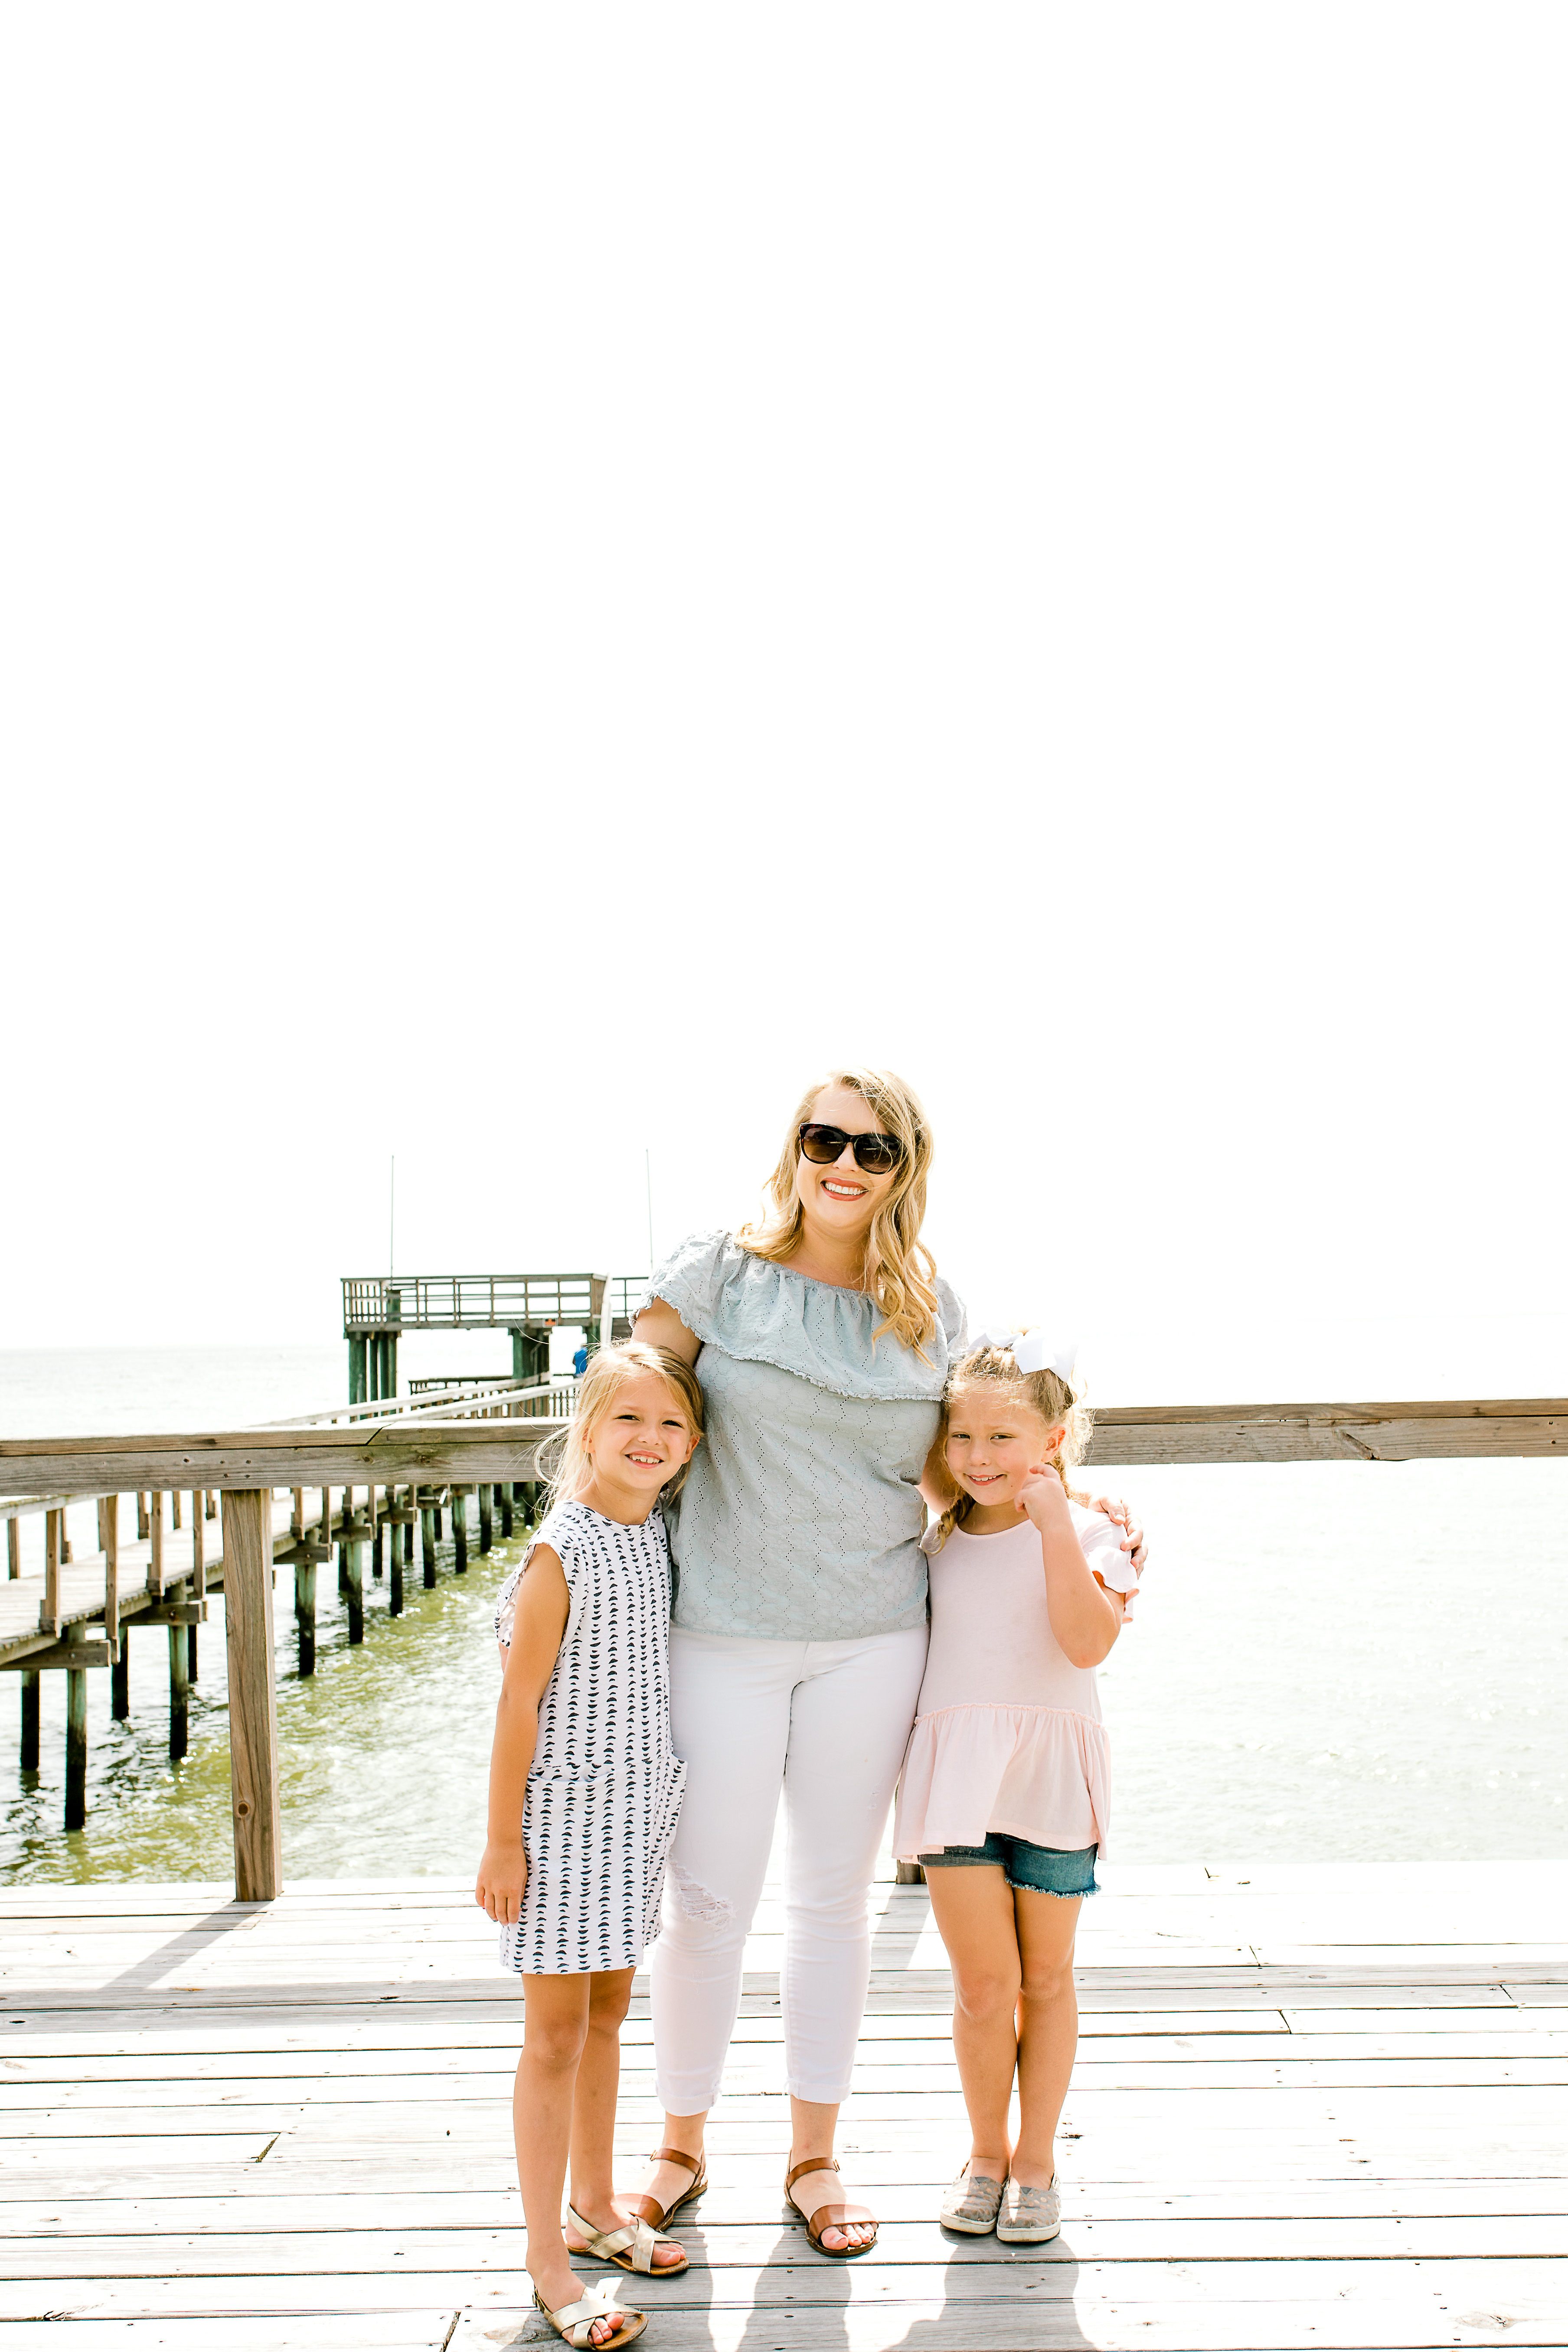 Mom and daughters smiling together on dock near beach. 